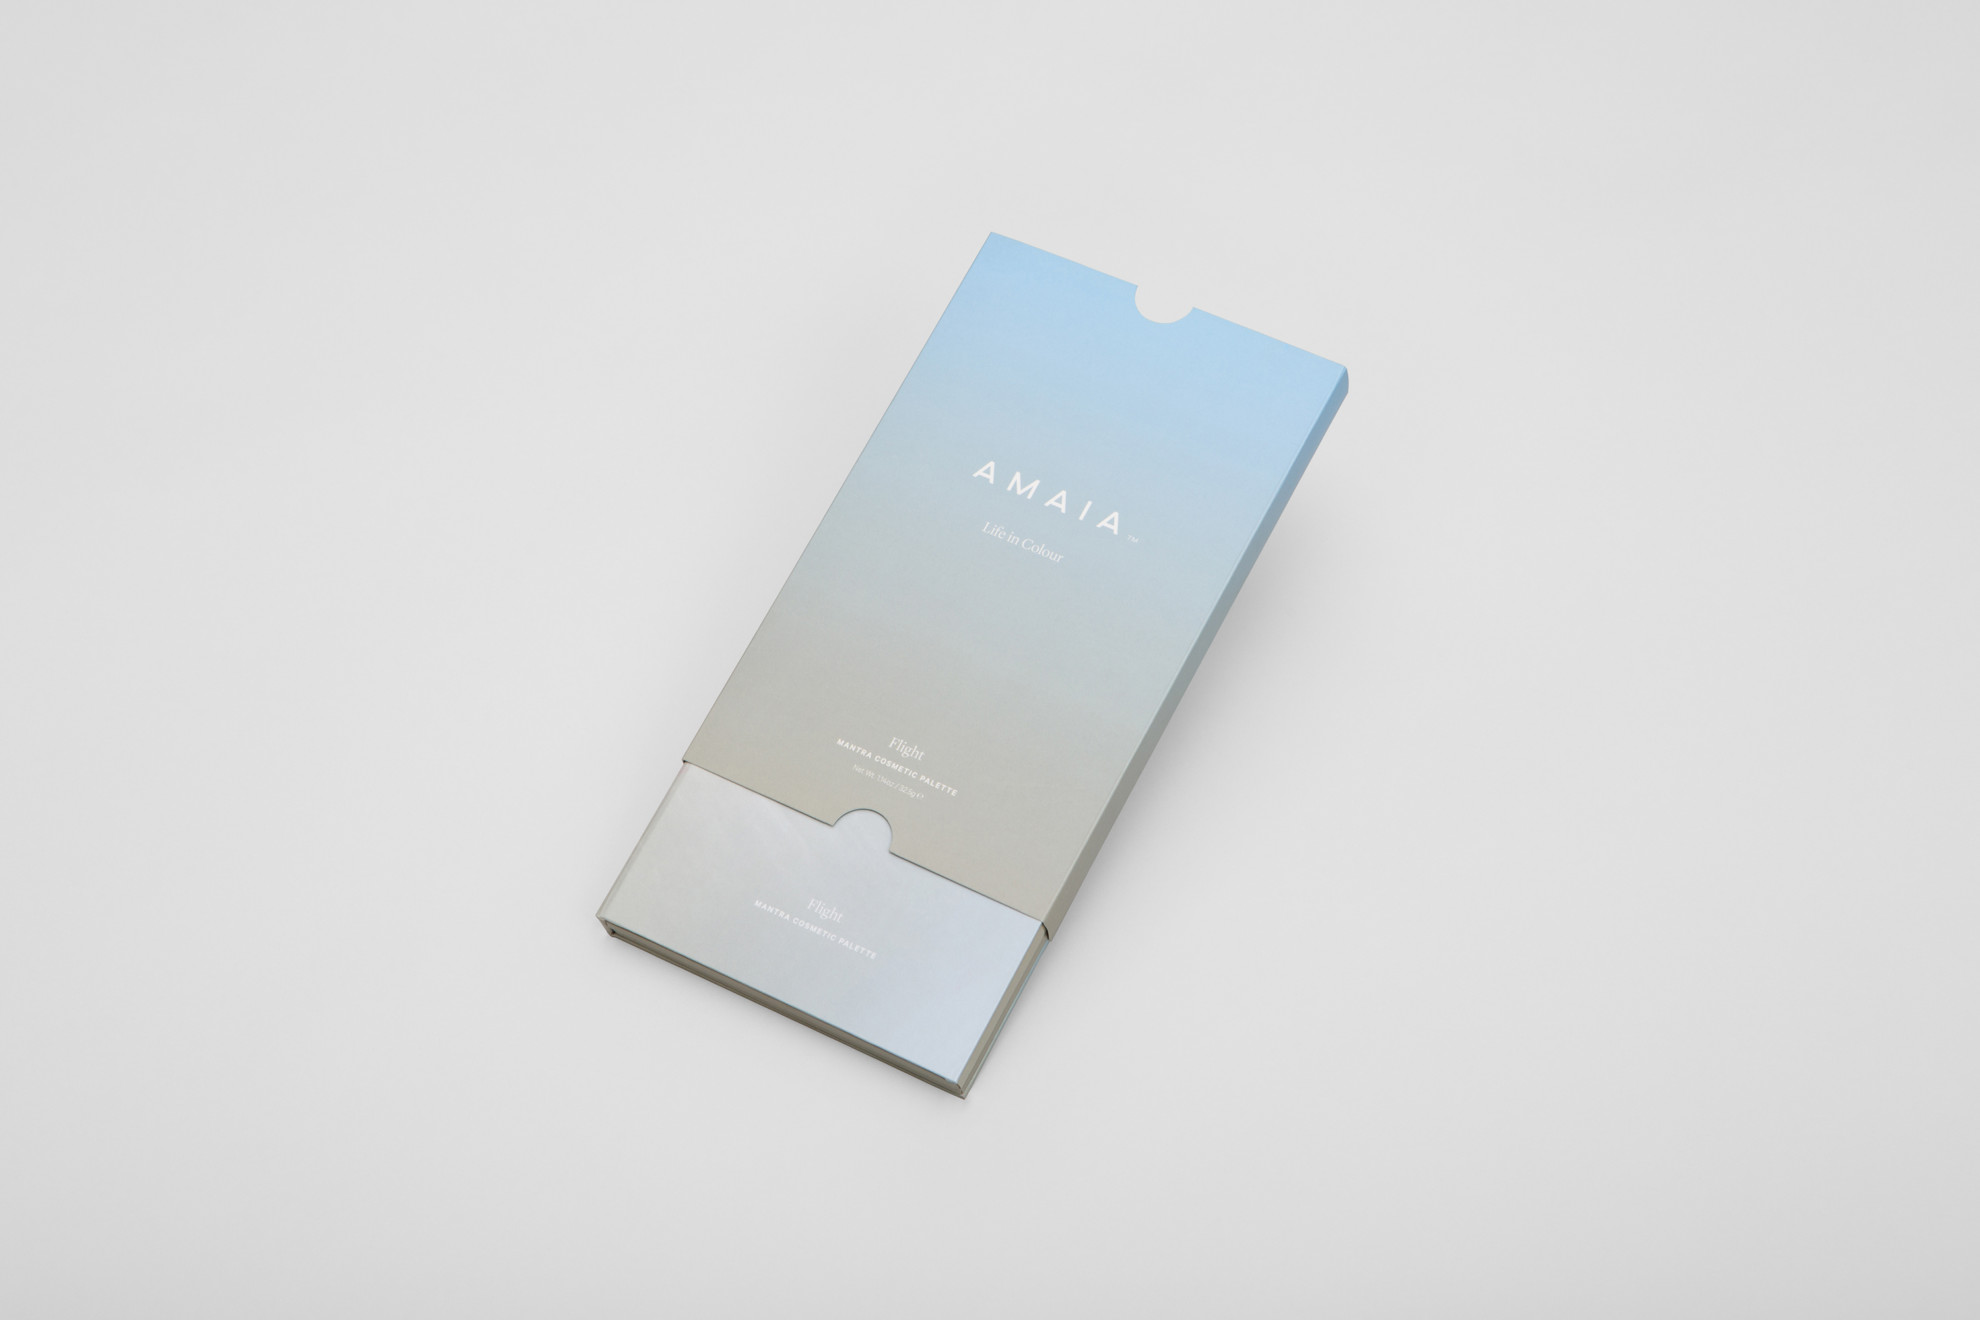 AMAIA - Packaging